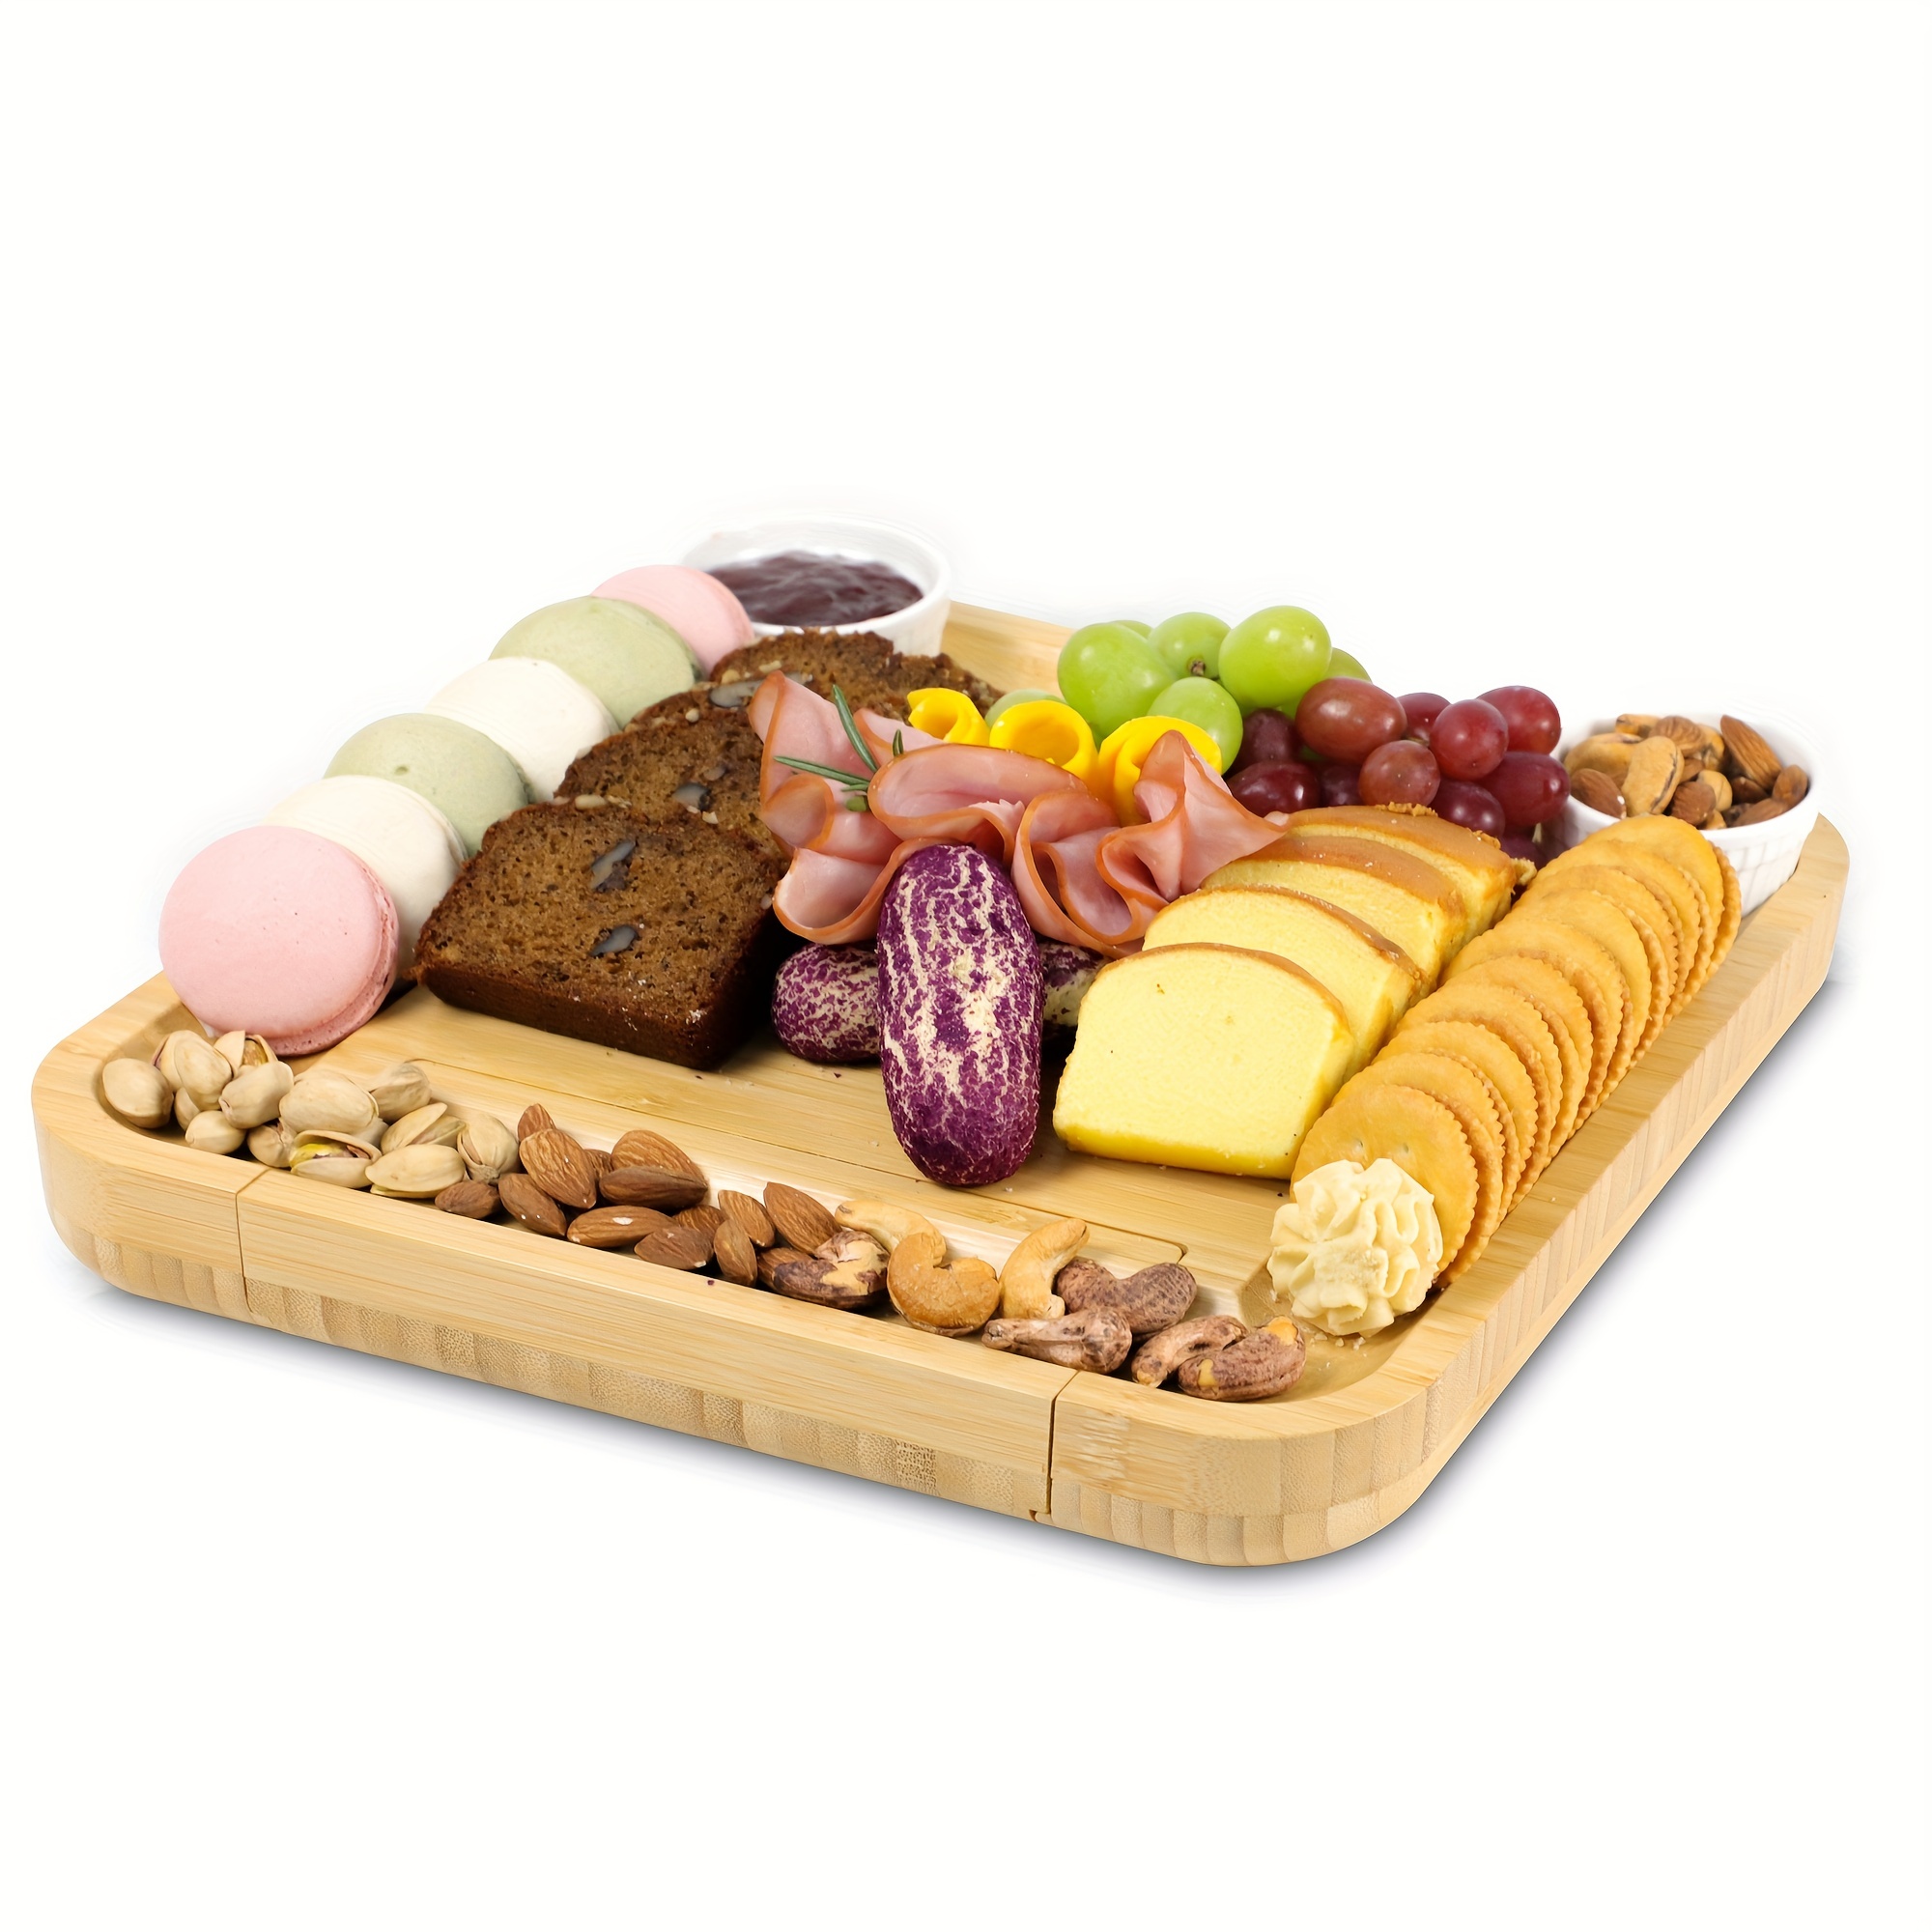 SMIRLY Bamboo Cheese Board and Knife Set: Large Charcuterie Boards